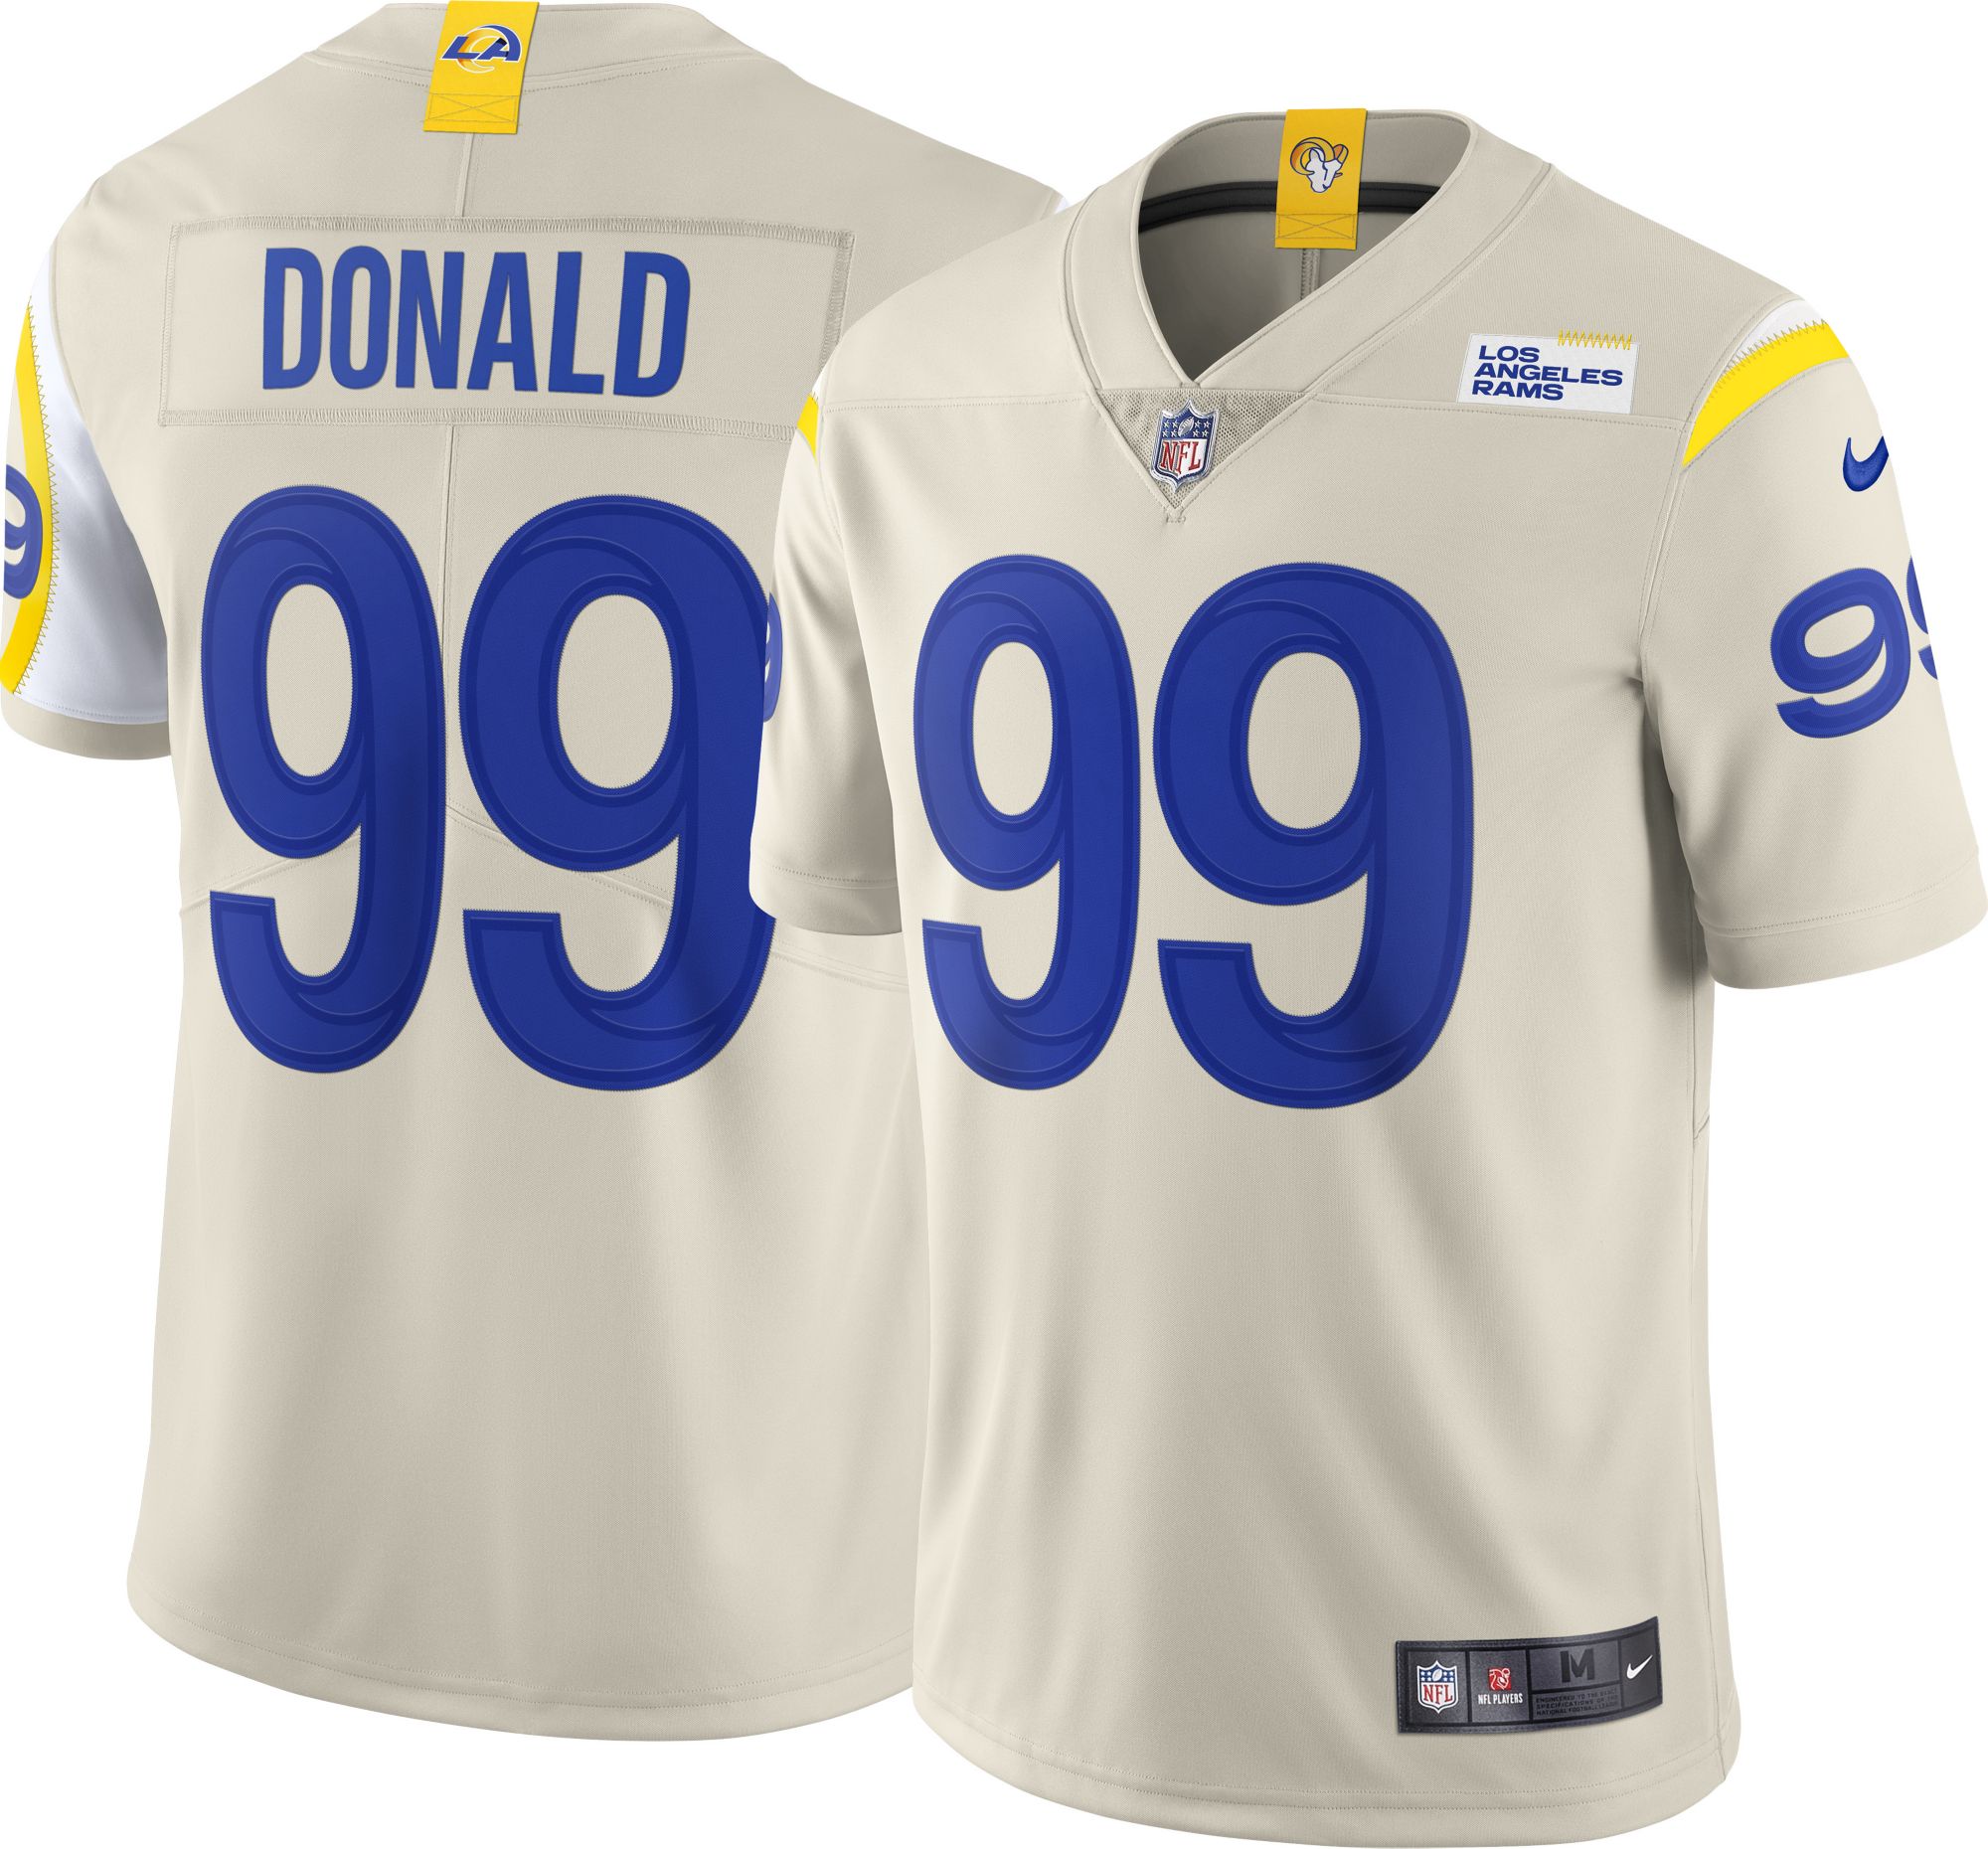 Nike / Men's Los Angeles Rams Aaron Donald #99 White Limited Jersey